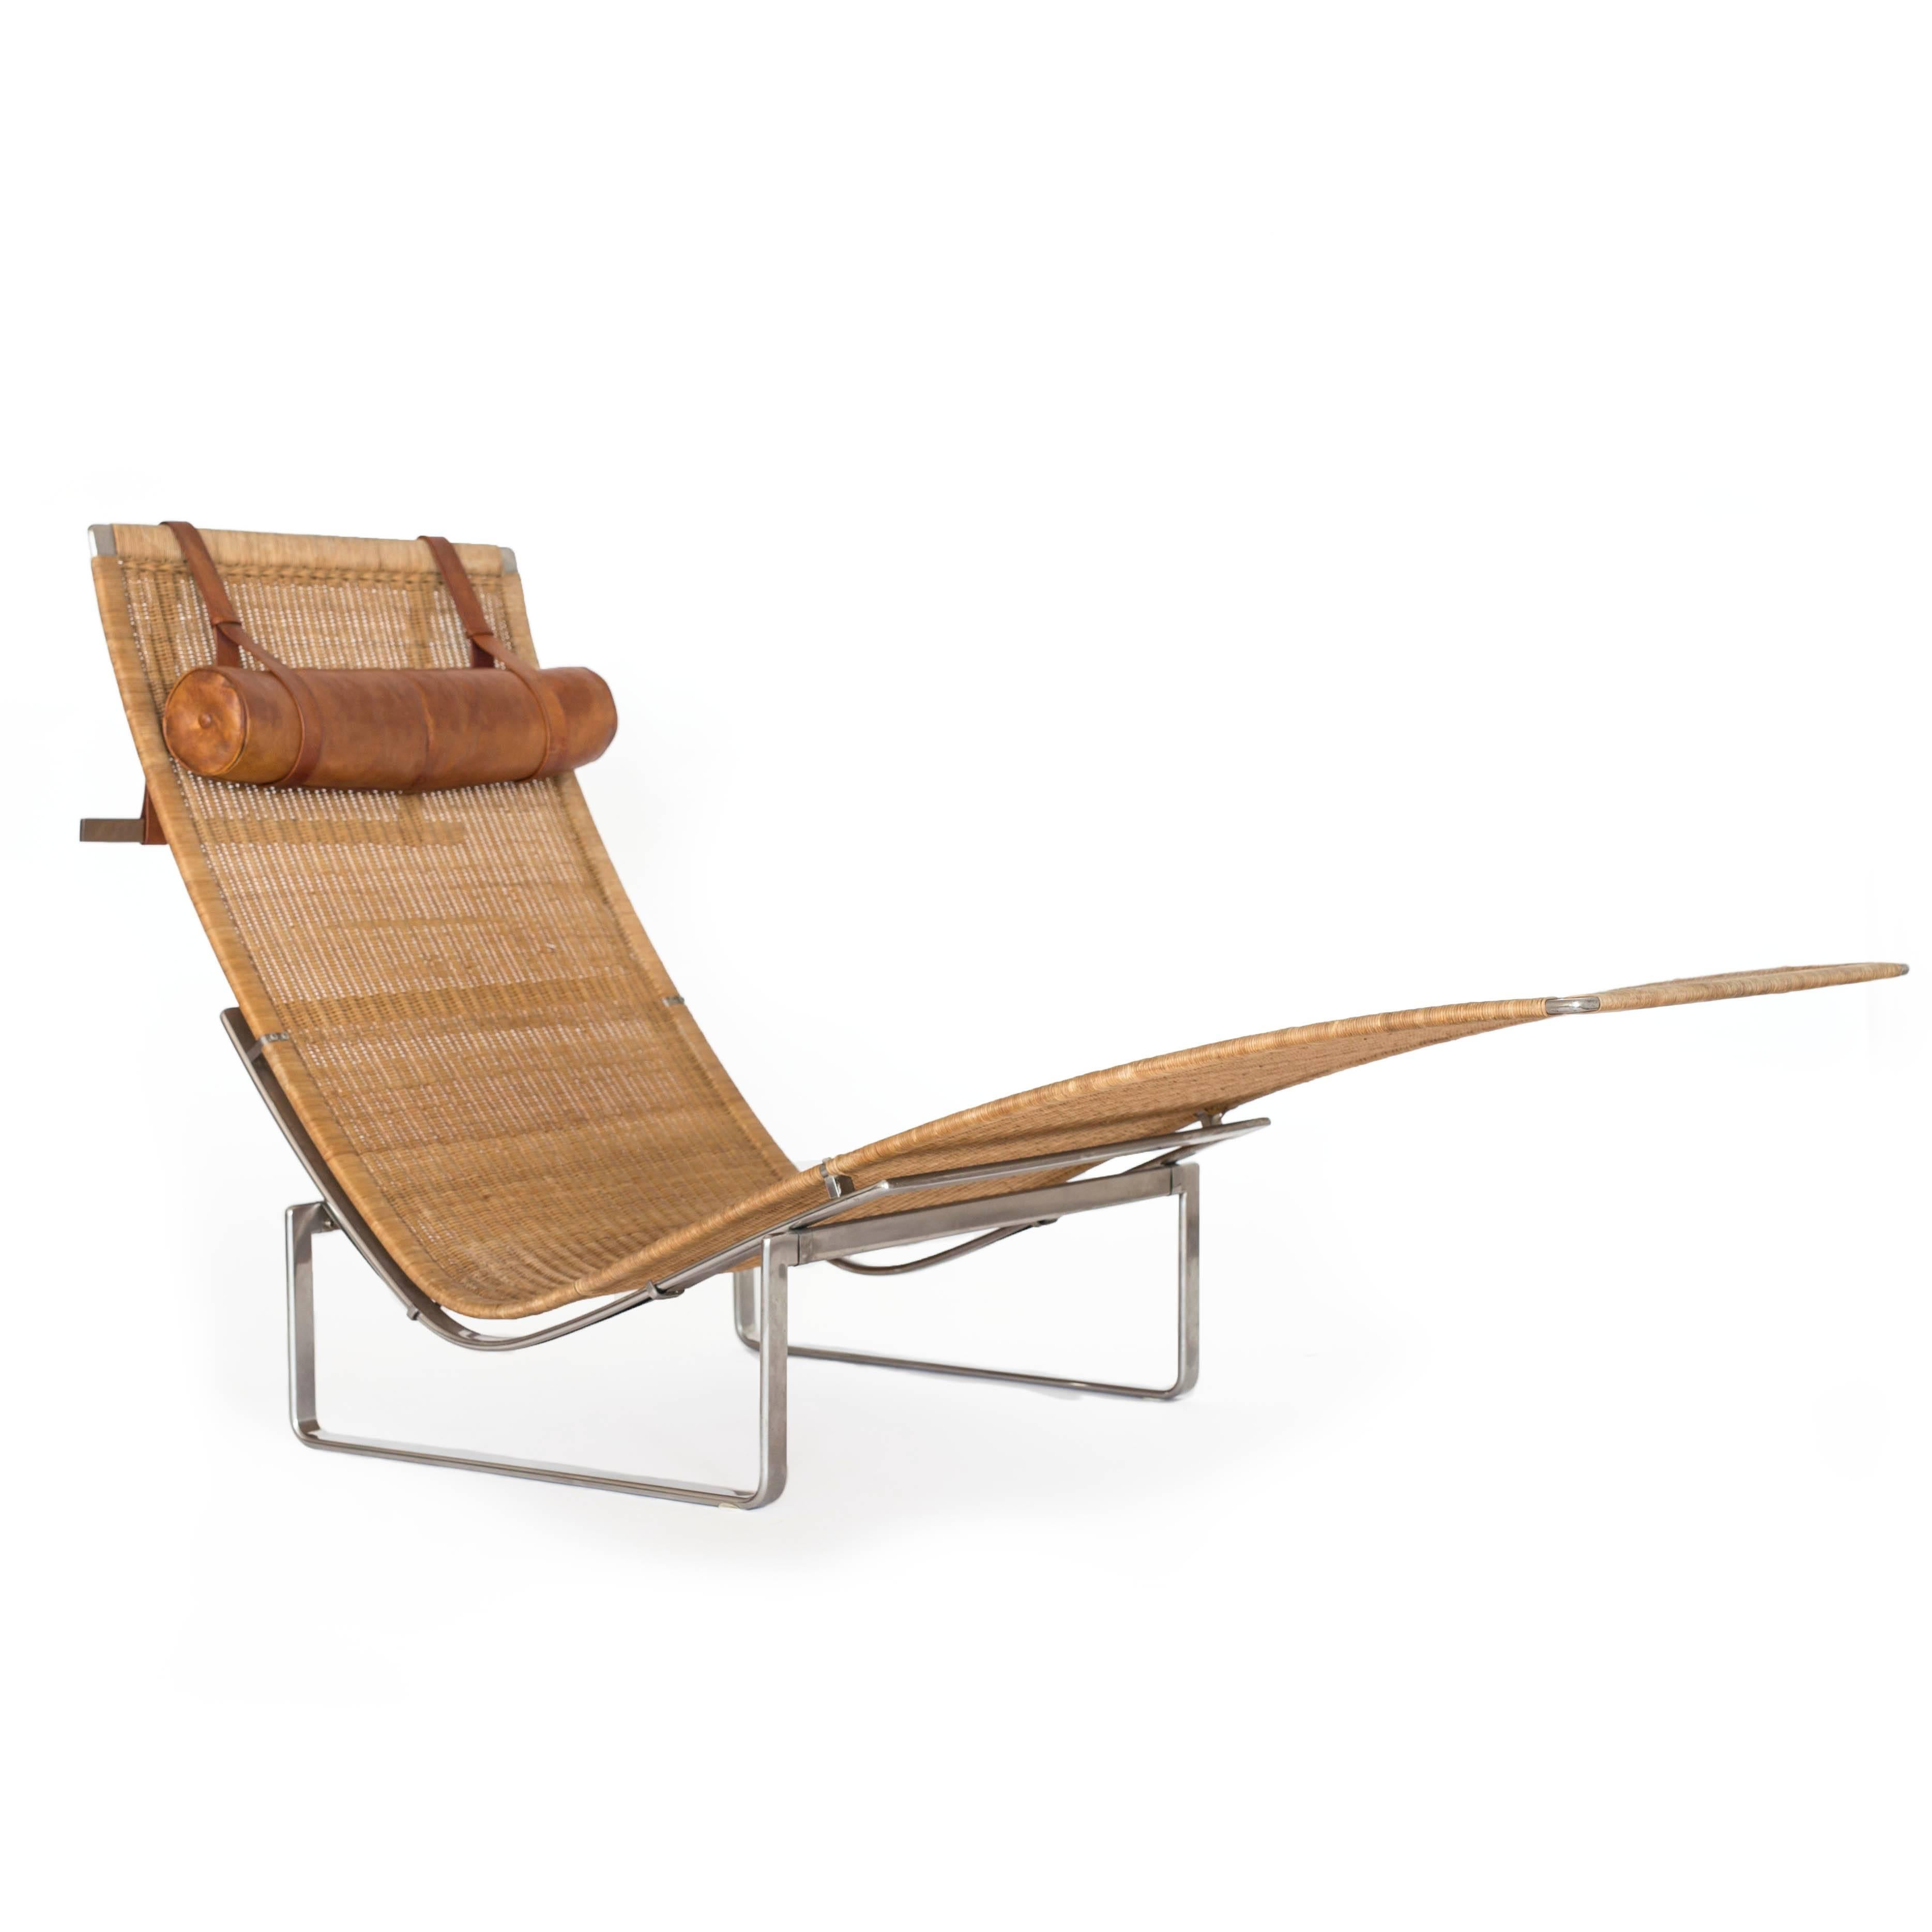 Poul Kjærholm PK-24 chaise longue with stainless steel frame, woven cane and headrest upholstered with original patinated Nigerian leather. 

Designed 1965, made at E. Kold Christensen, Denmark, 1960s. 
Beautiful original condition.